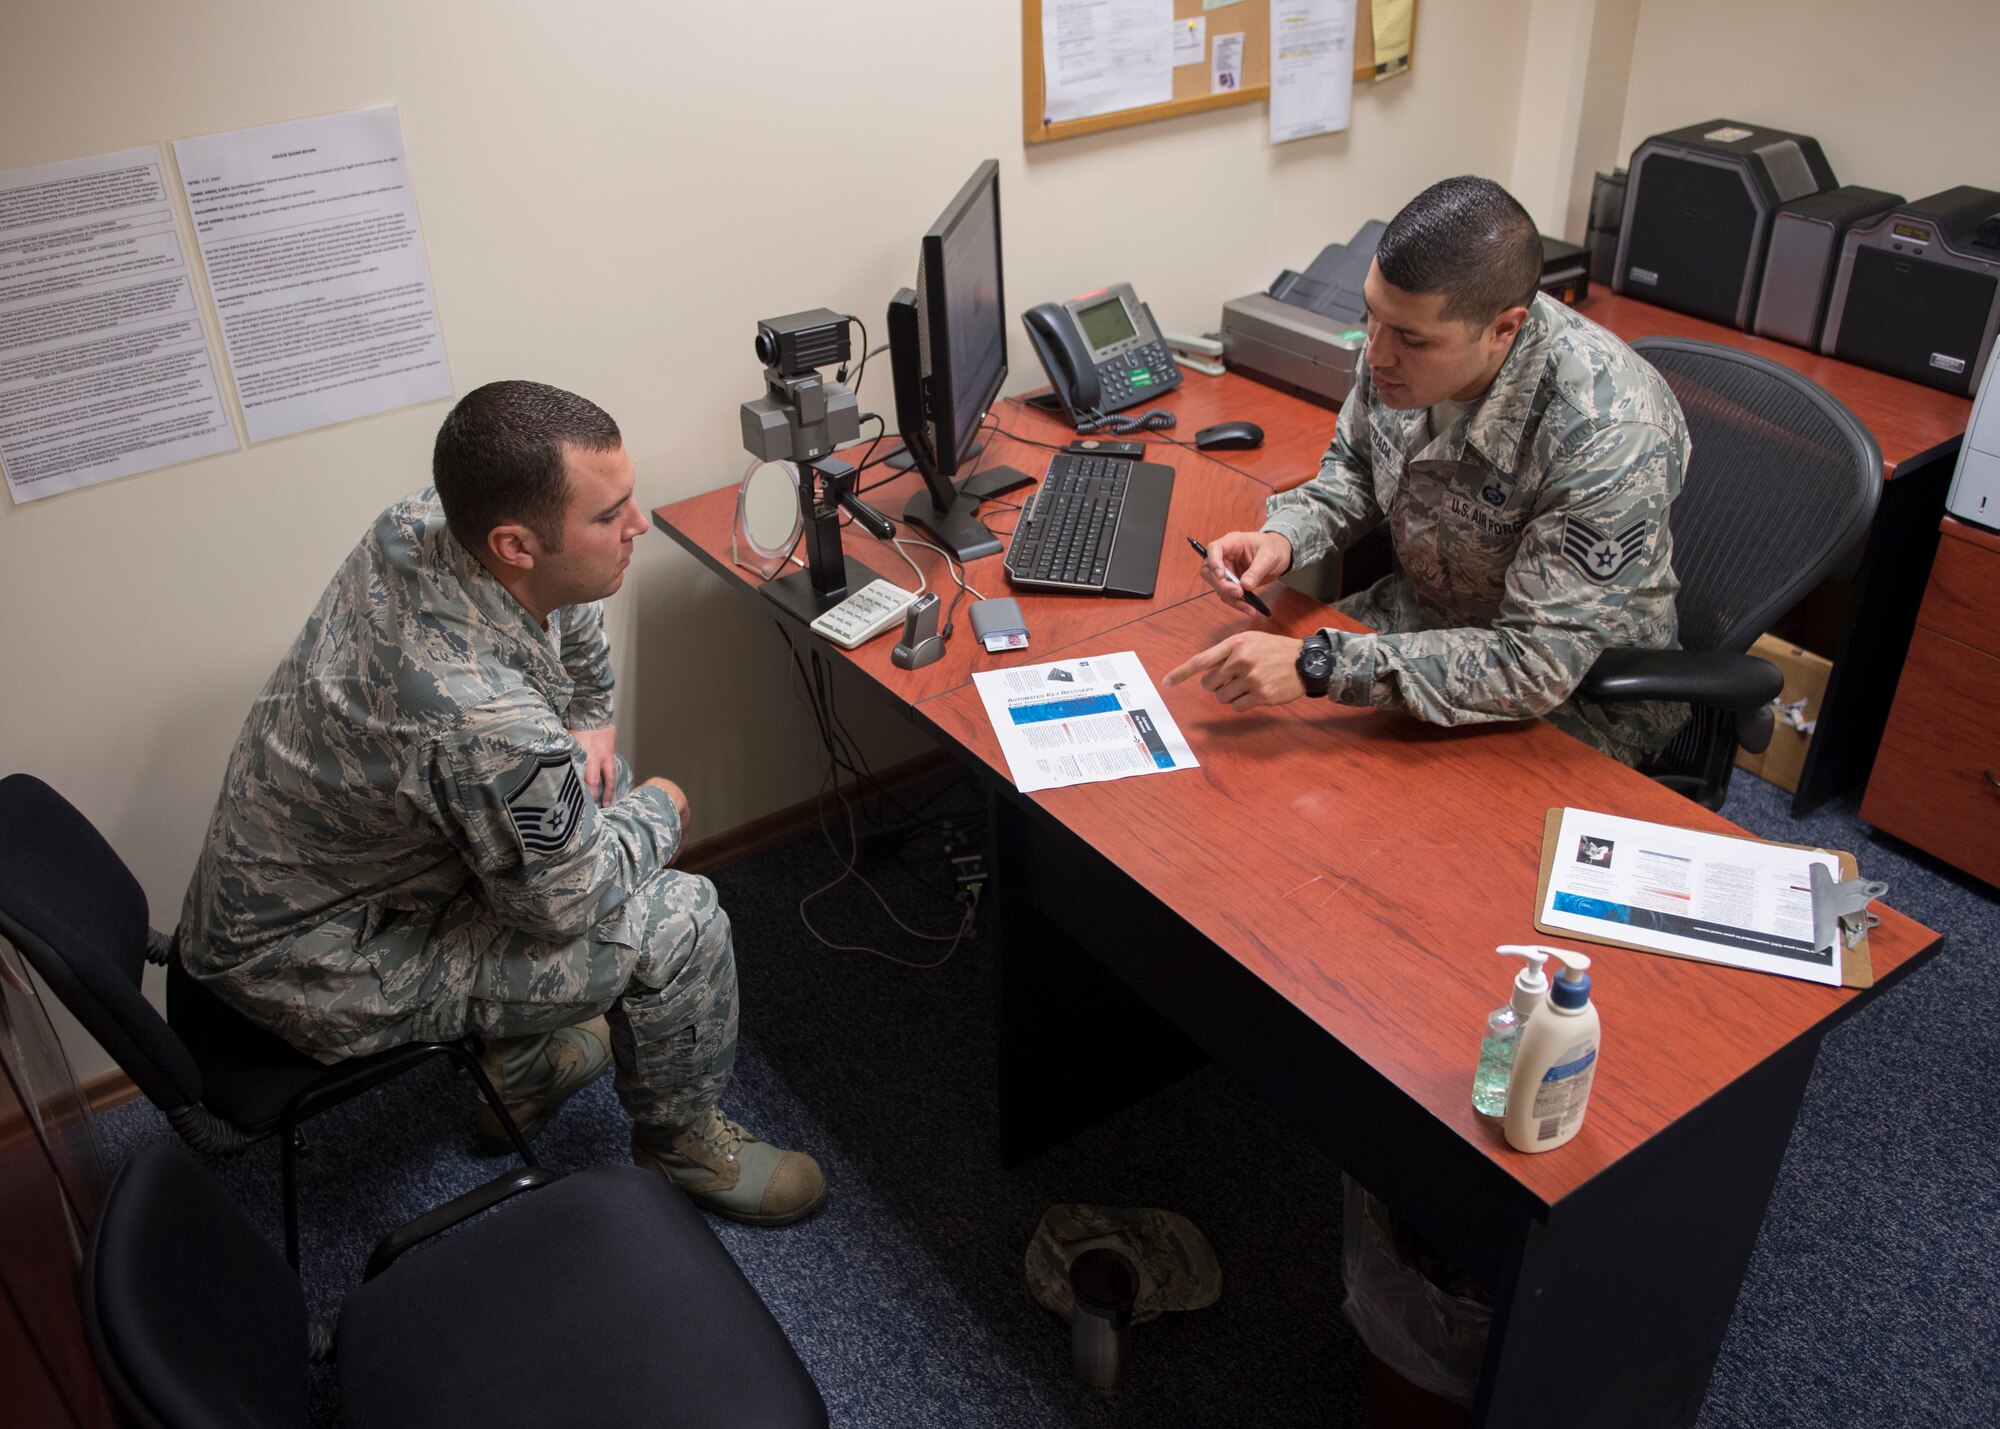 U.S. Air Force Staff Sgt. Maximiliano Estrada, 39th Force Support Squadron Military Personnel Flight NCO in charge of customer service, creates a new ID for a customer at Incirlik Air Base, Turkey, Nov. 27, 2018.